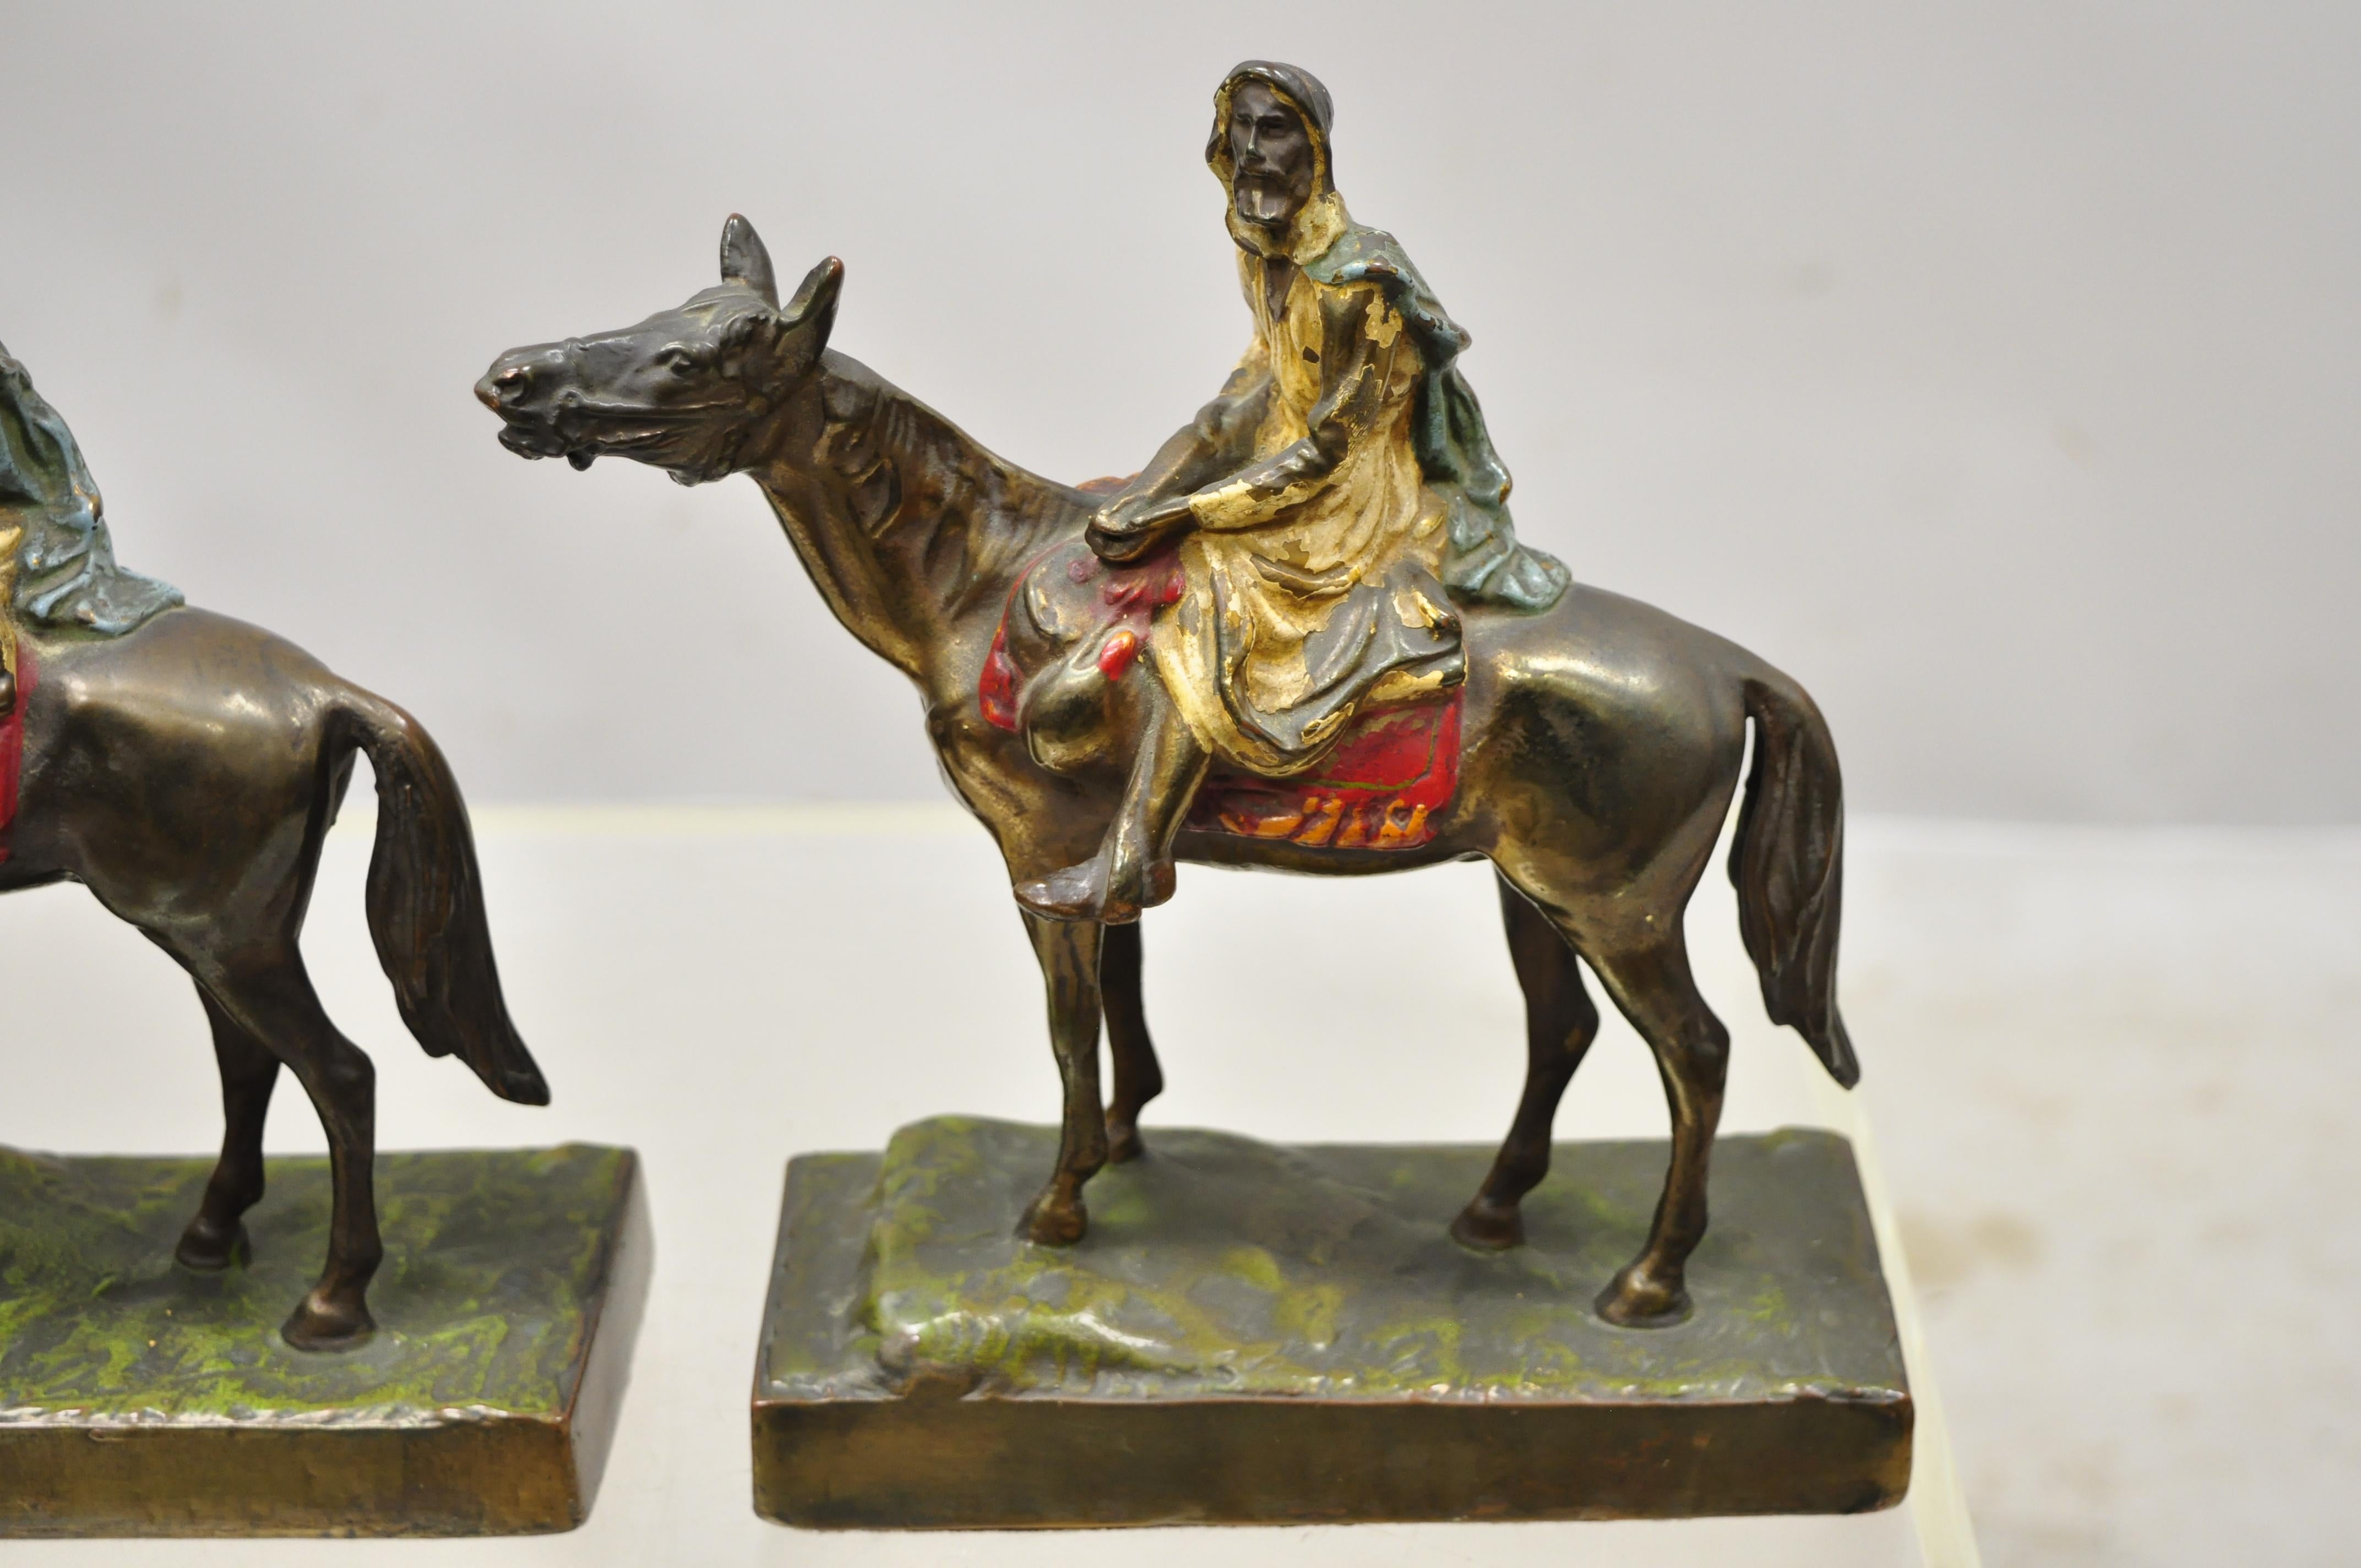 Antique gold painted bronze Polychrome Moorish Arab horse rider bookends - a pair. Item believed to be bronze but unconfirmed, Circa early to mid 1900s. Measurements: 9